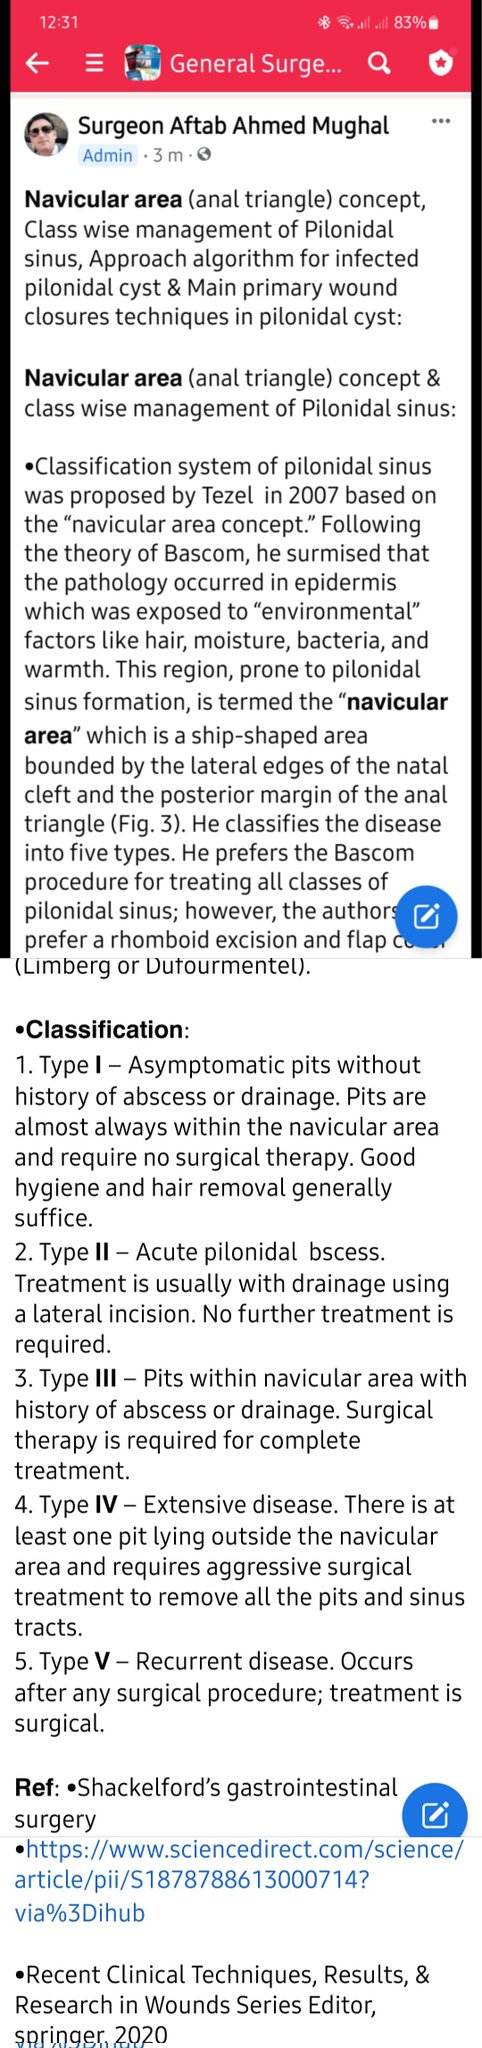 DR AFTAB AHMED on X: 𝗡𝗮𝘃𝗶𝗰𝘂𝗹𝗮𝗿 𝗮𝗿𝗲𝗮 (anal triangle) concept,  Class wise management of Pilonidal sinus, Approach algorithm for infected pilonidal  cyst & Main primary wound closures techniques in pilonidal cyst: Ref